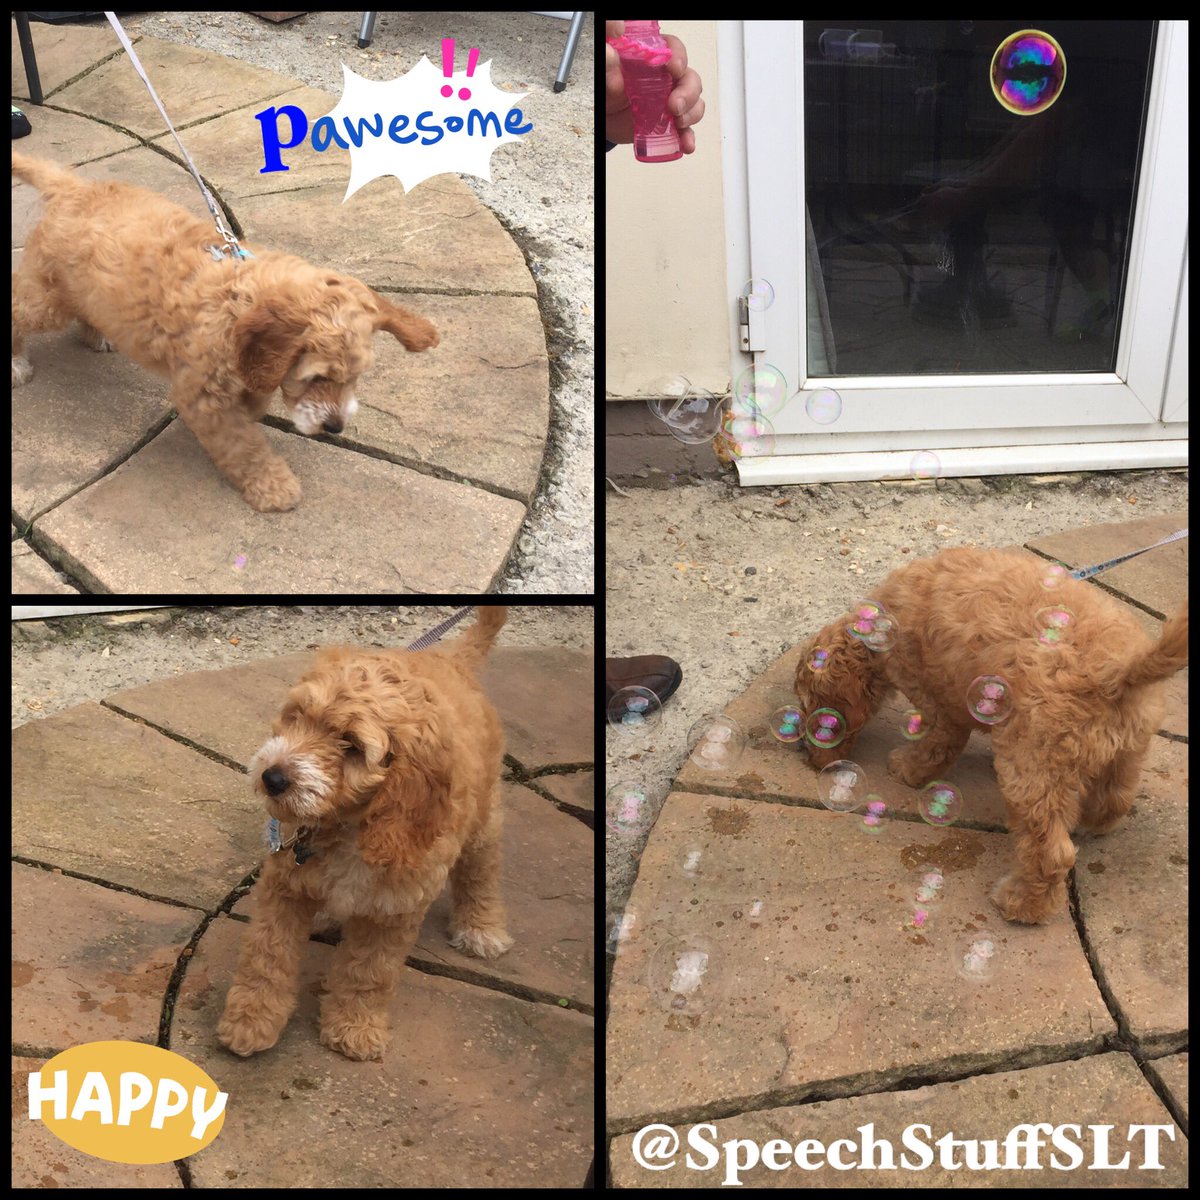 I love bubbles! They are so versatile and a great opportunity for developing children’s attention & language skills. 

Our #puppy Barney had lots of fun exploring bubbles for the first time this afternoon. He says it was #pawsome! 

#bubbles #childspeech #childlanguage #puppyfun